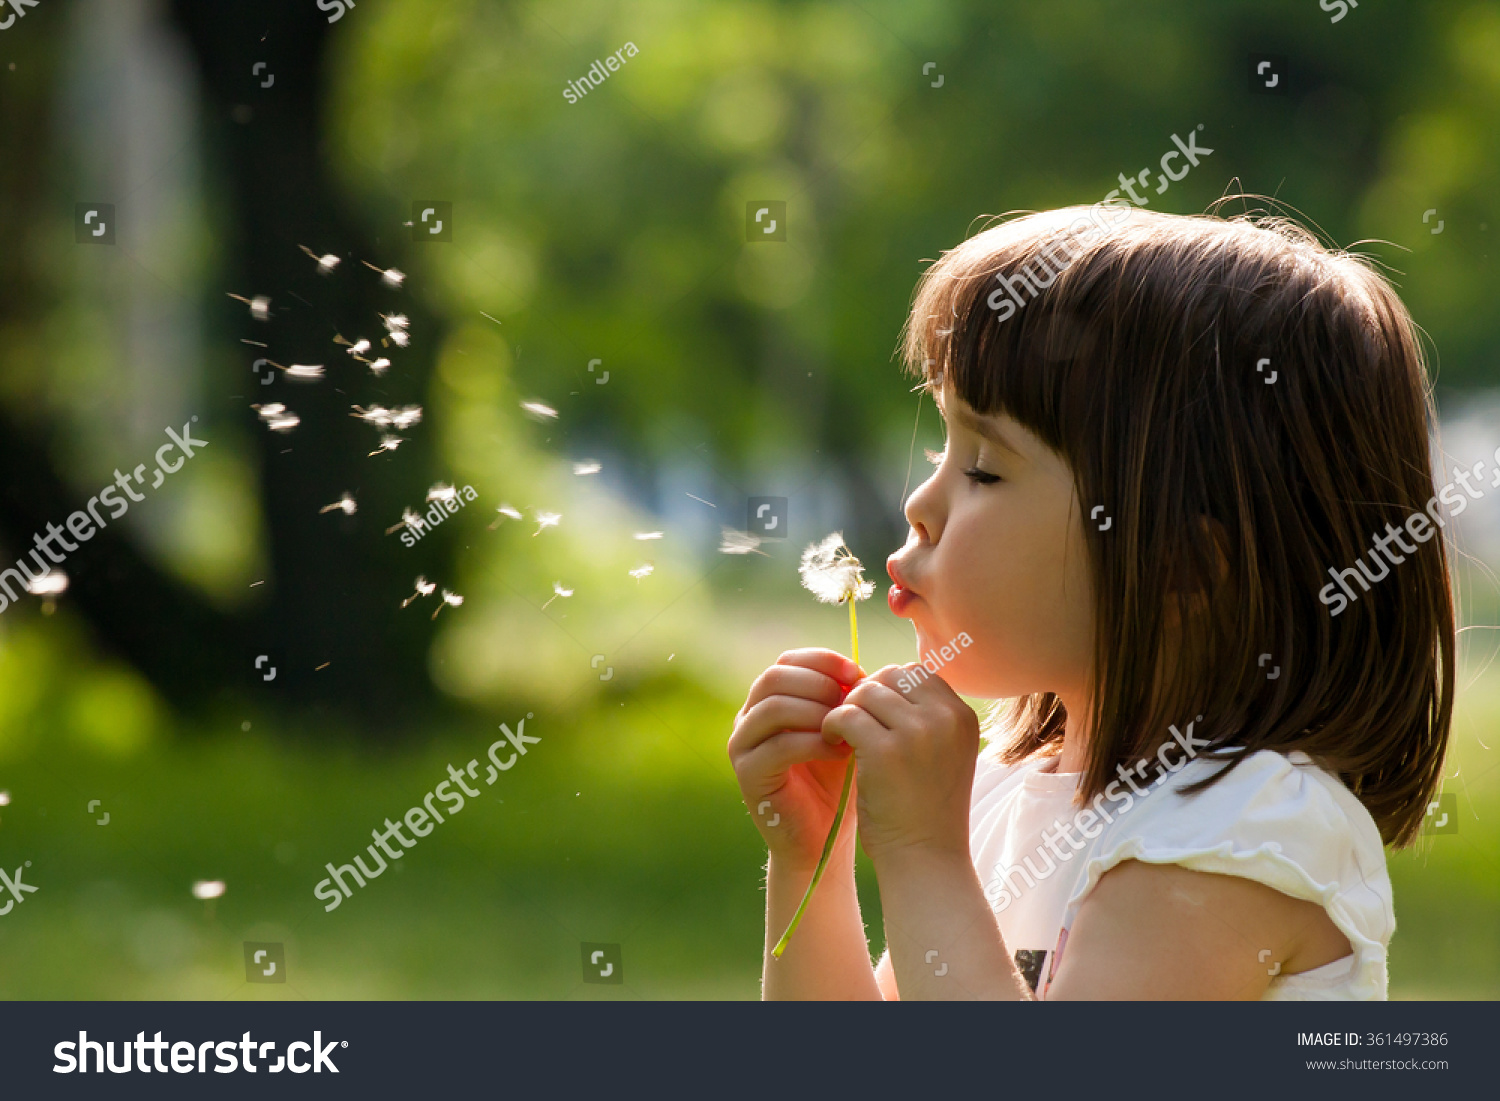 Beautiful child with dandelion flower in spring park. Happy kid having fun outdoors. #361497386